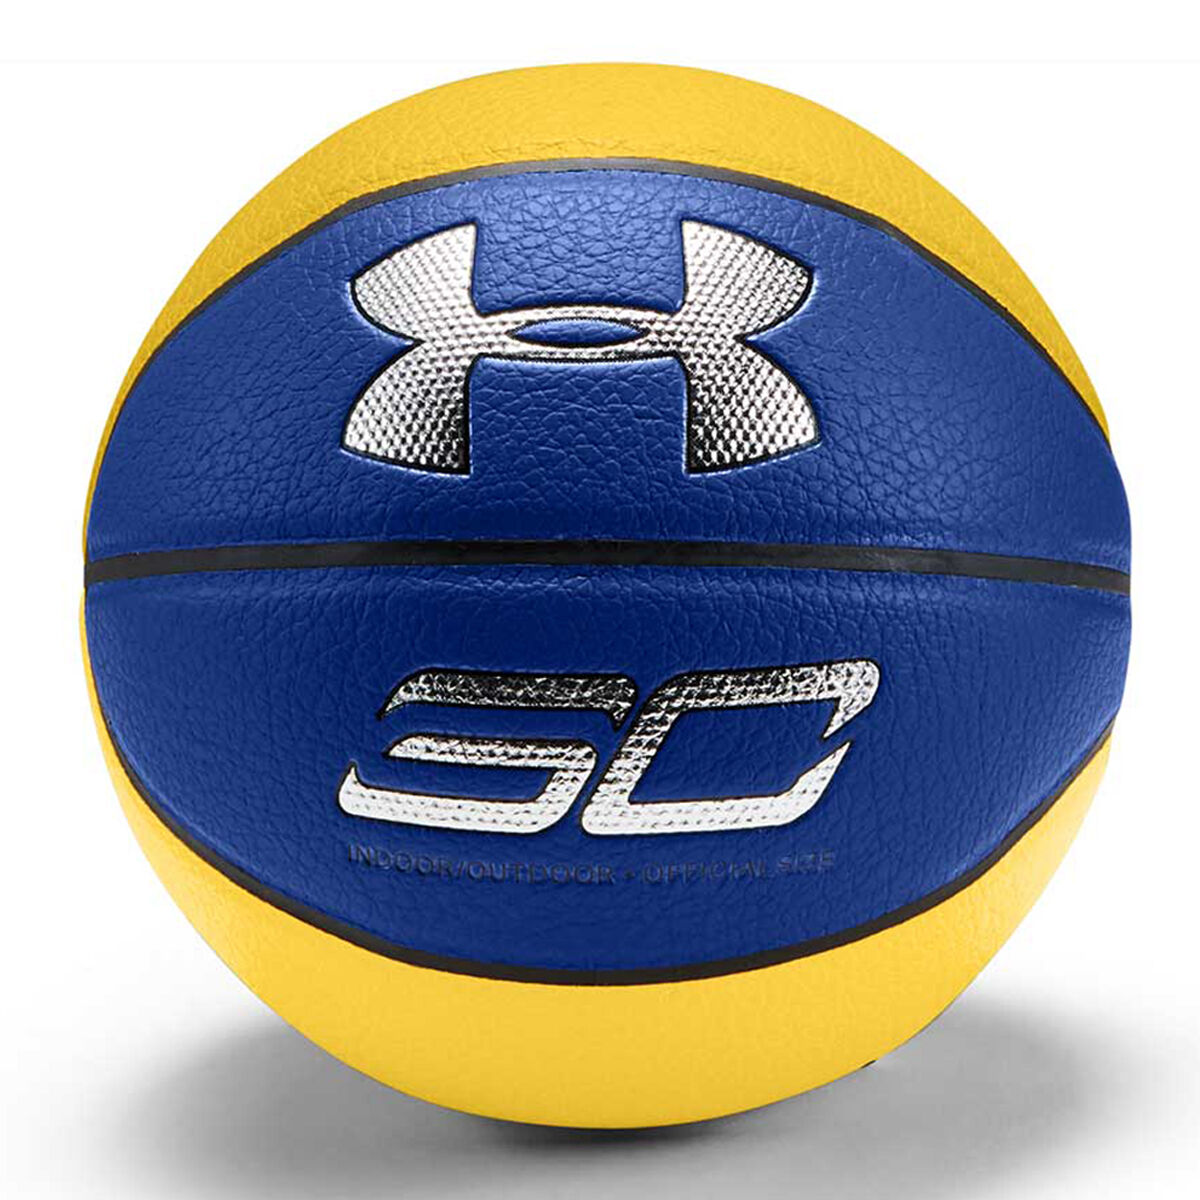 under armour stephen curry basketball official